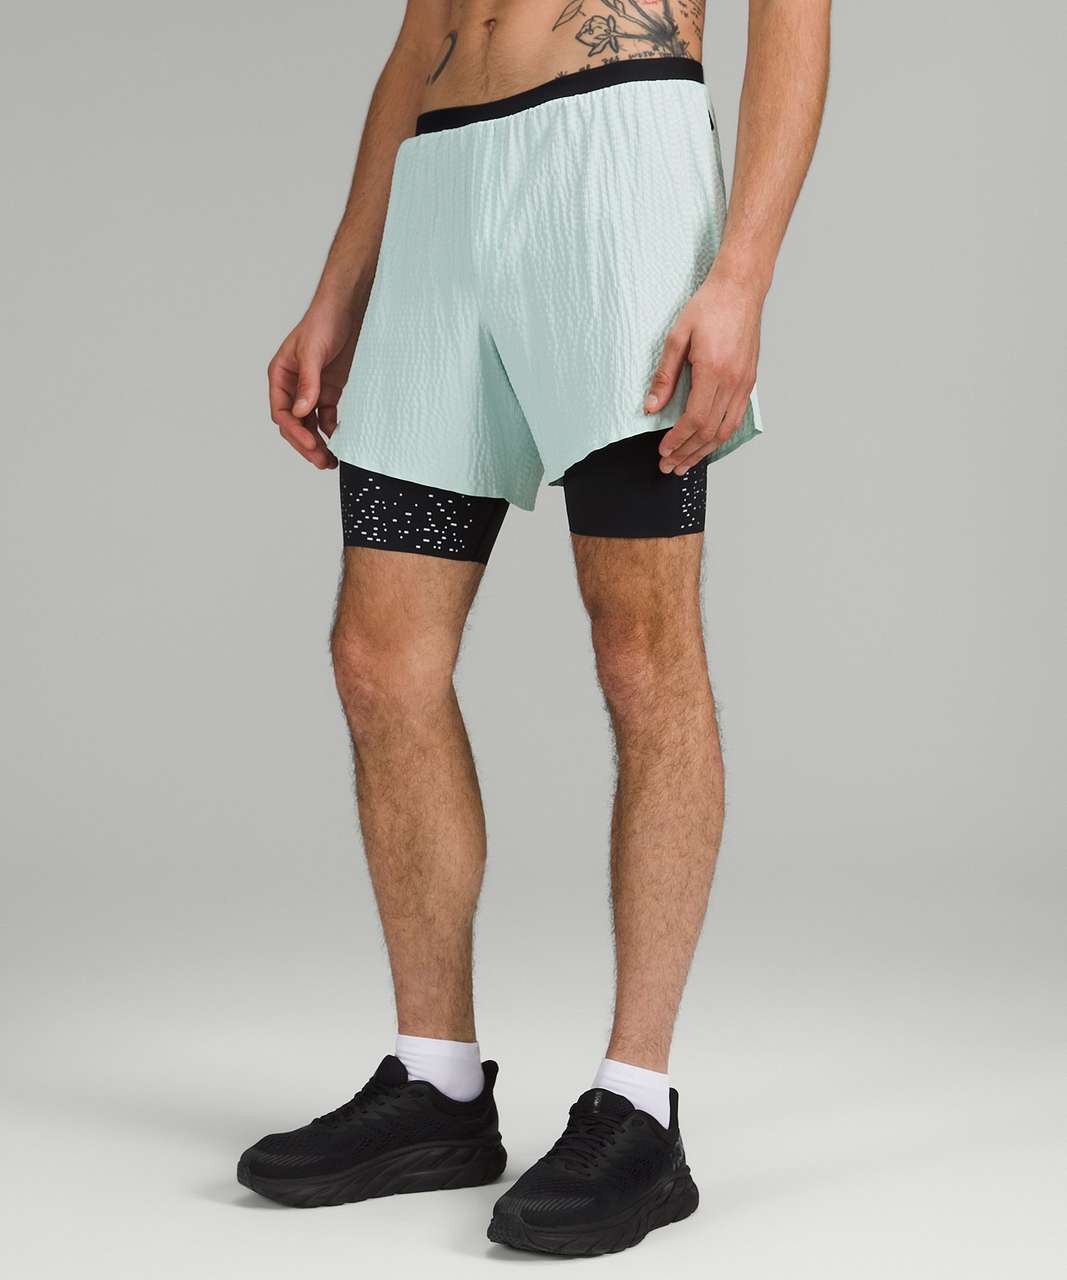 Lululemon Surge Lined Short 6" *Special Edition - Delicate Mint / Inflect Textured Raw Linen Multi